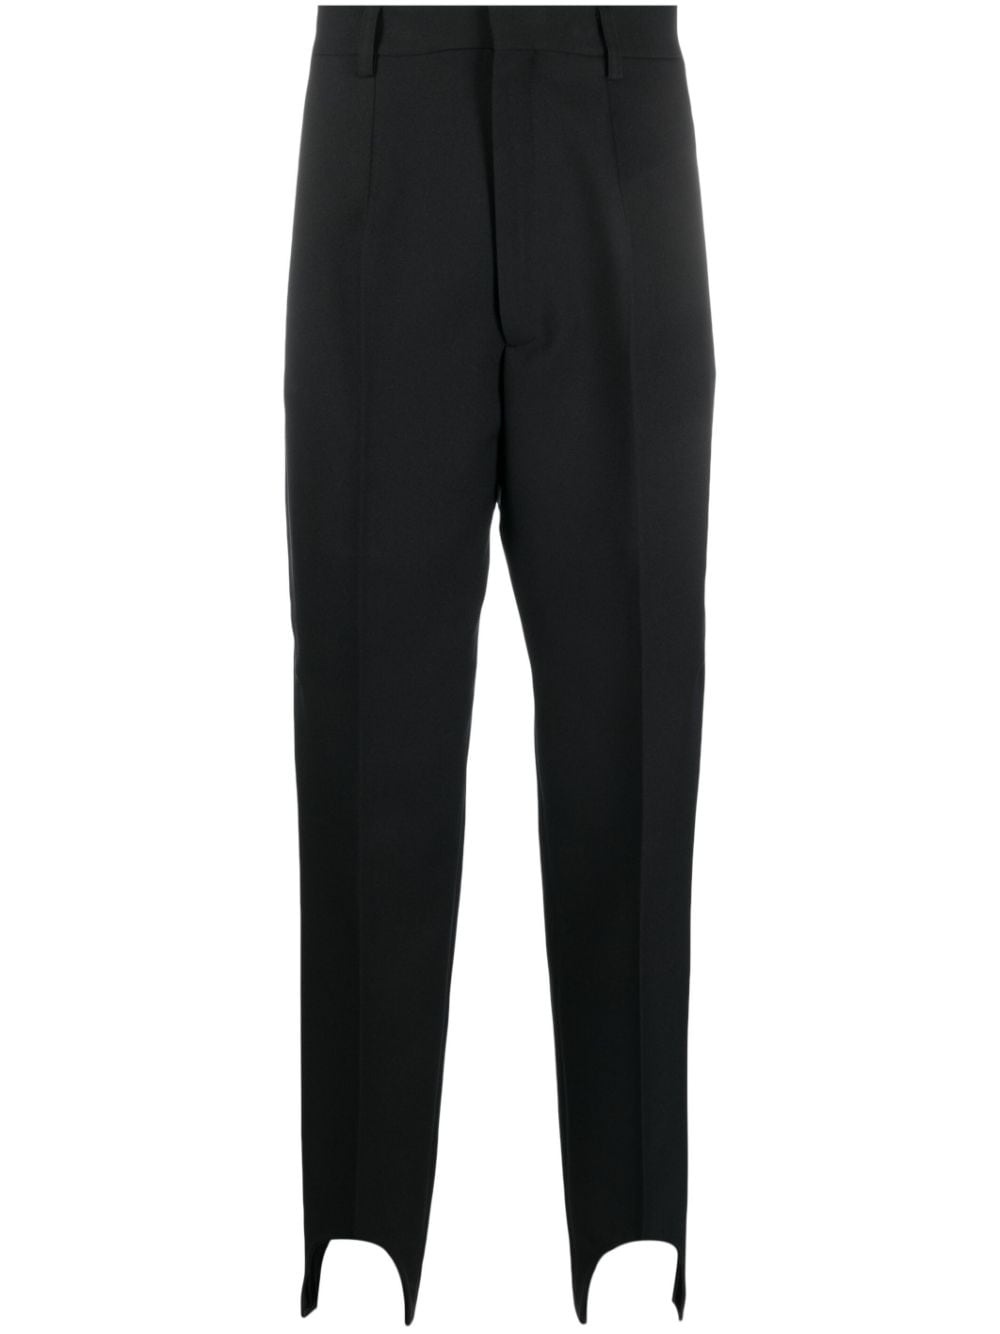 tapered stirrup trousers - 1